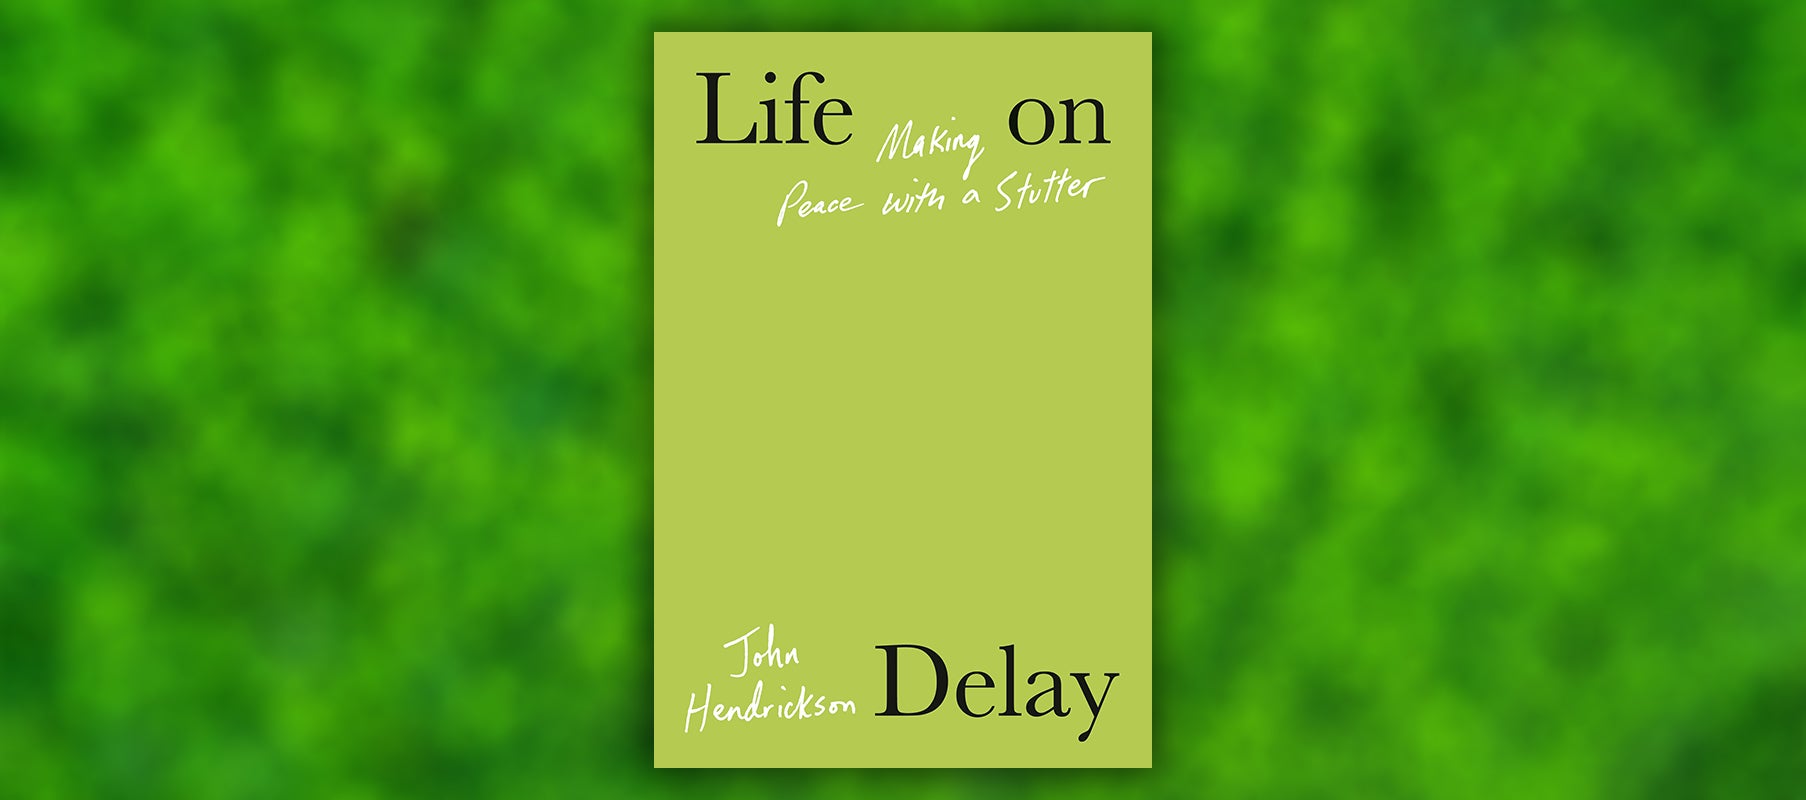 FROM THE PAGE: An Excerpt from John Hendrickson’s <I>Life on Delay</I>